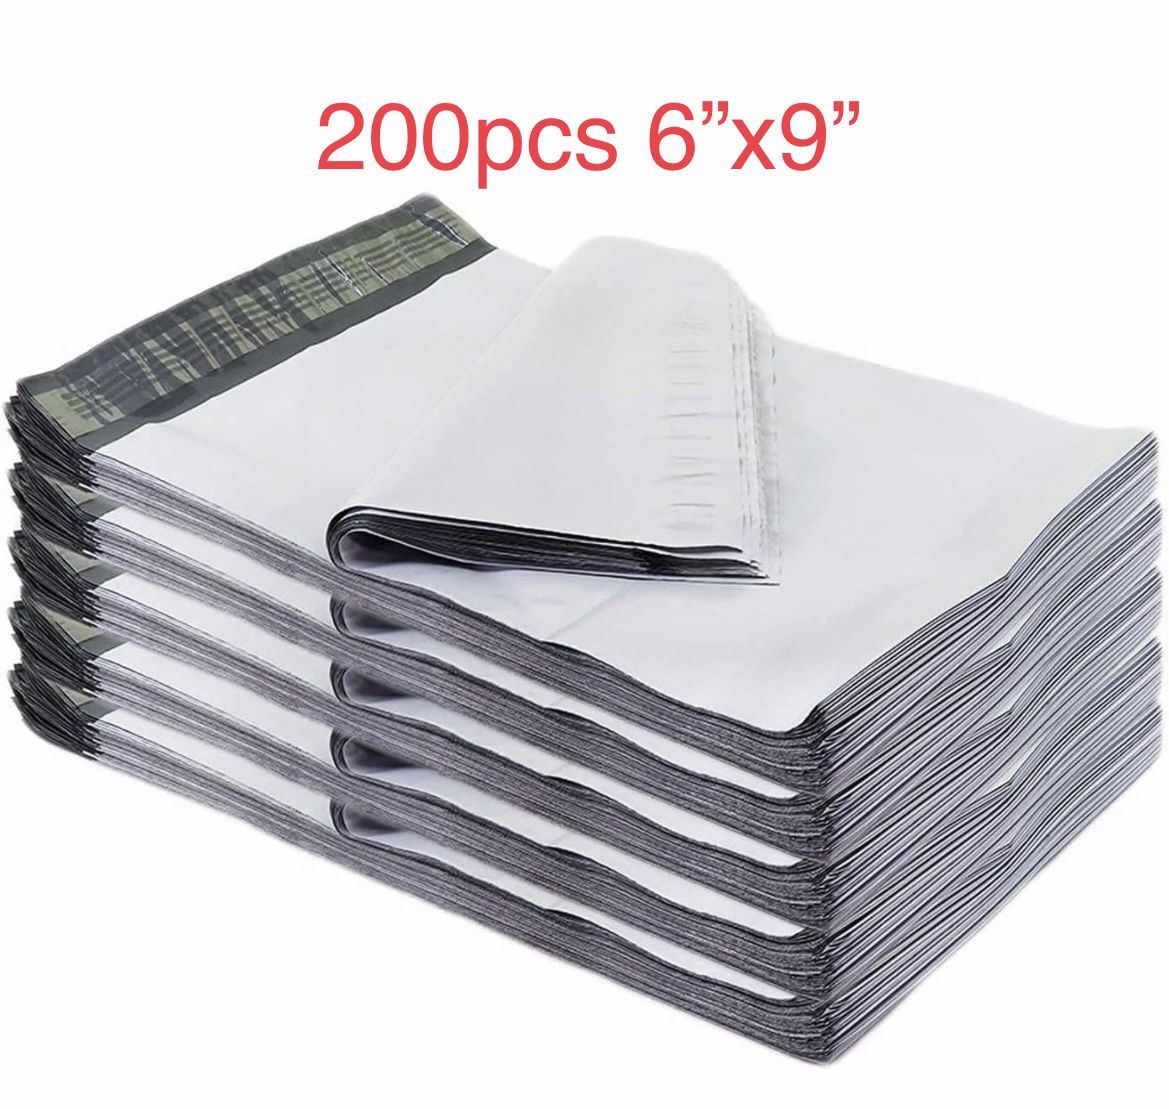 Brand New 200 pcs 6” X 9” White Poly Mailers Self Sealing Shipping Envelope Bags Plastic Mailing Bags 6x9 Inch